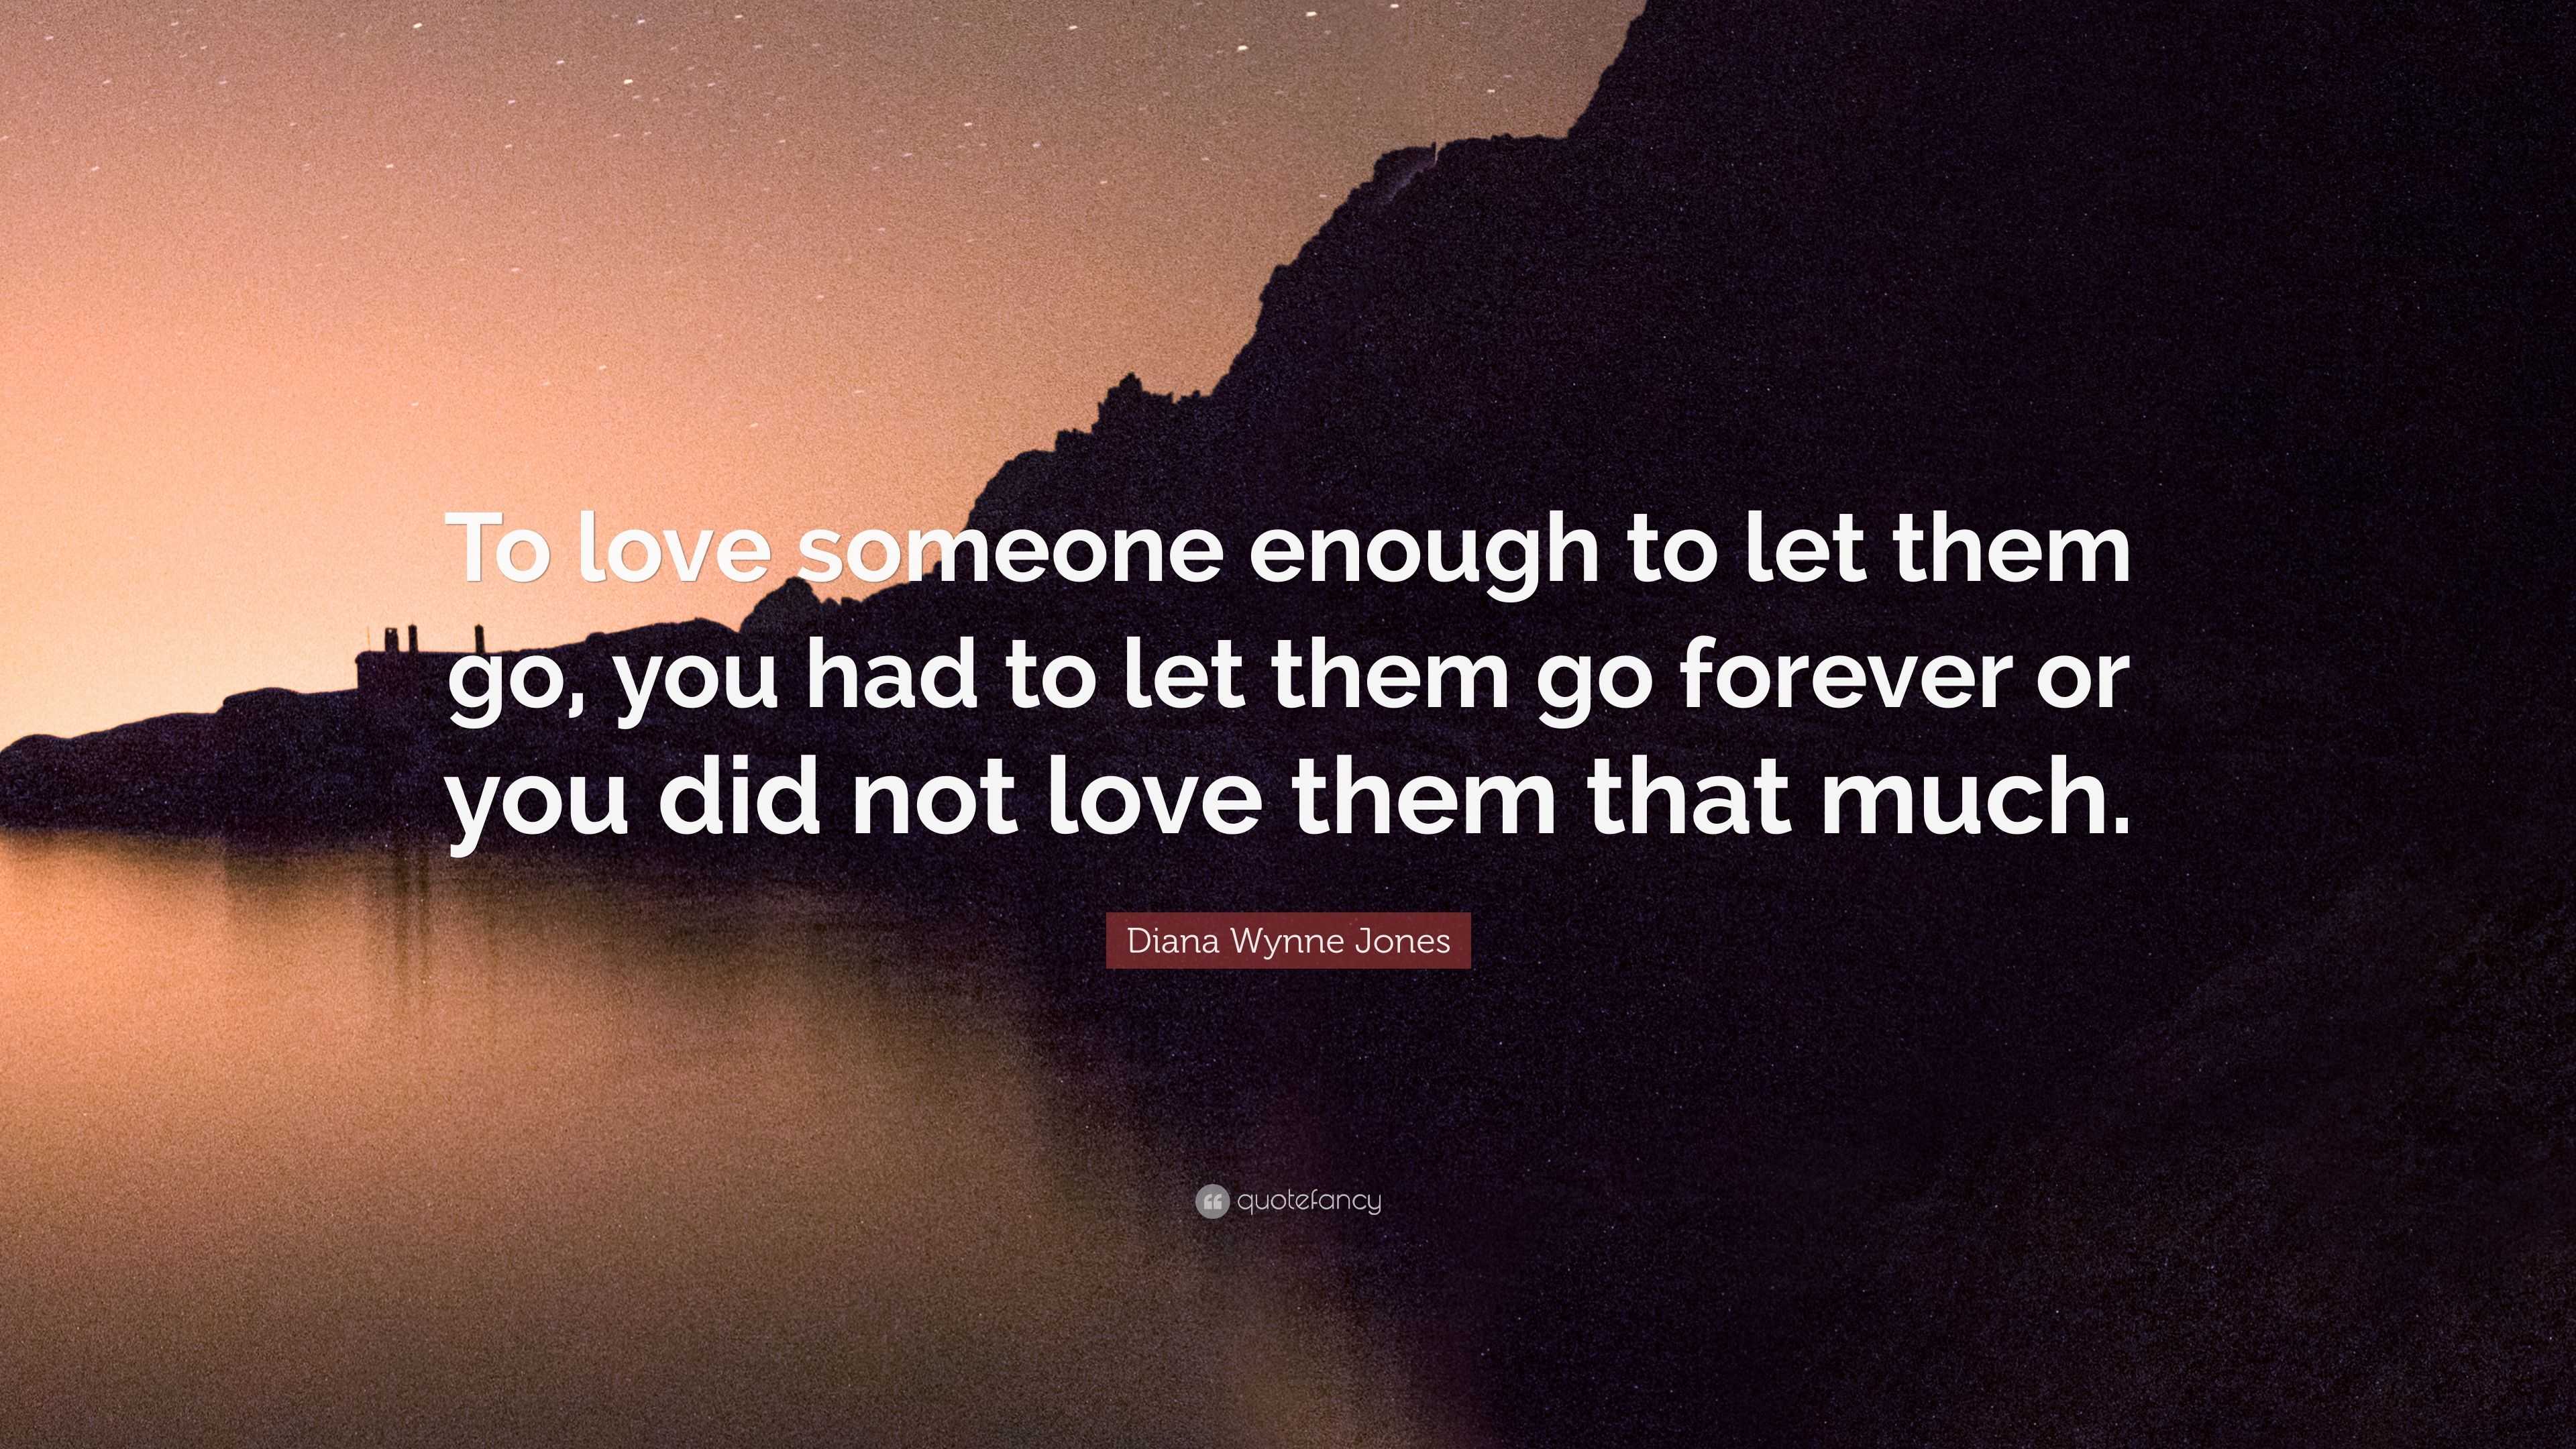 love someone enough to let them go